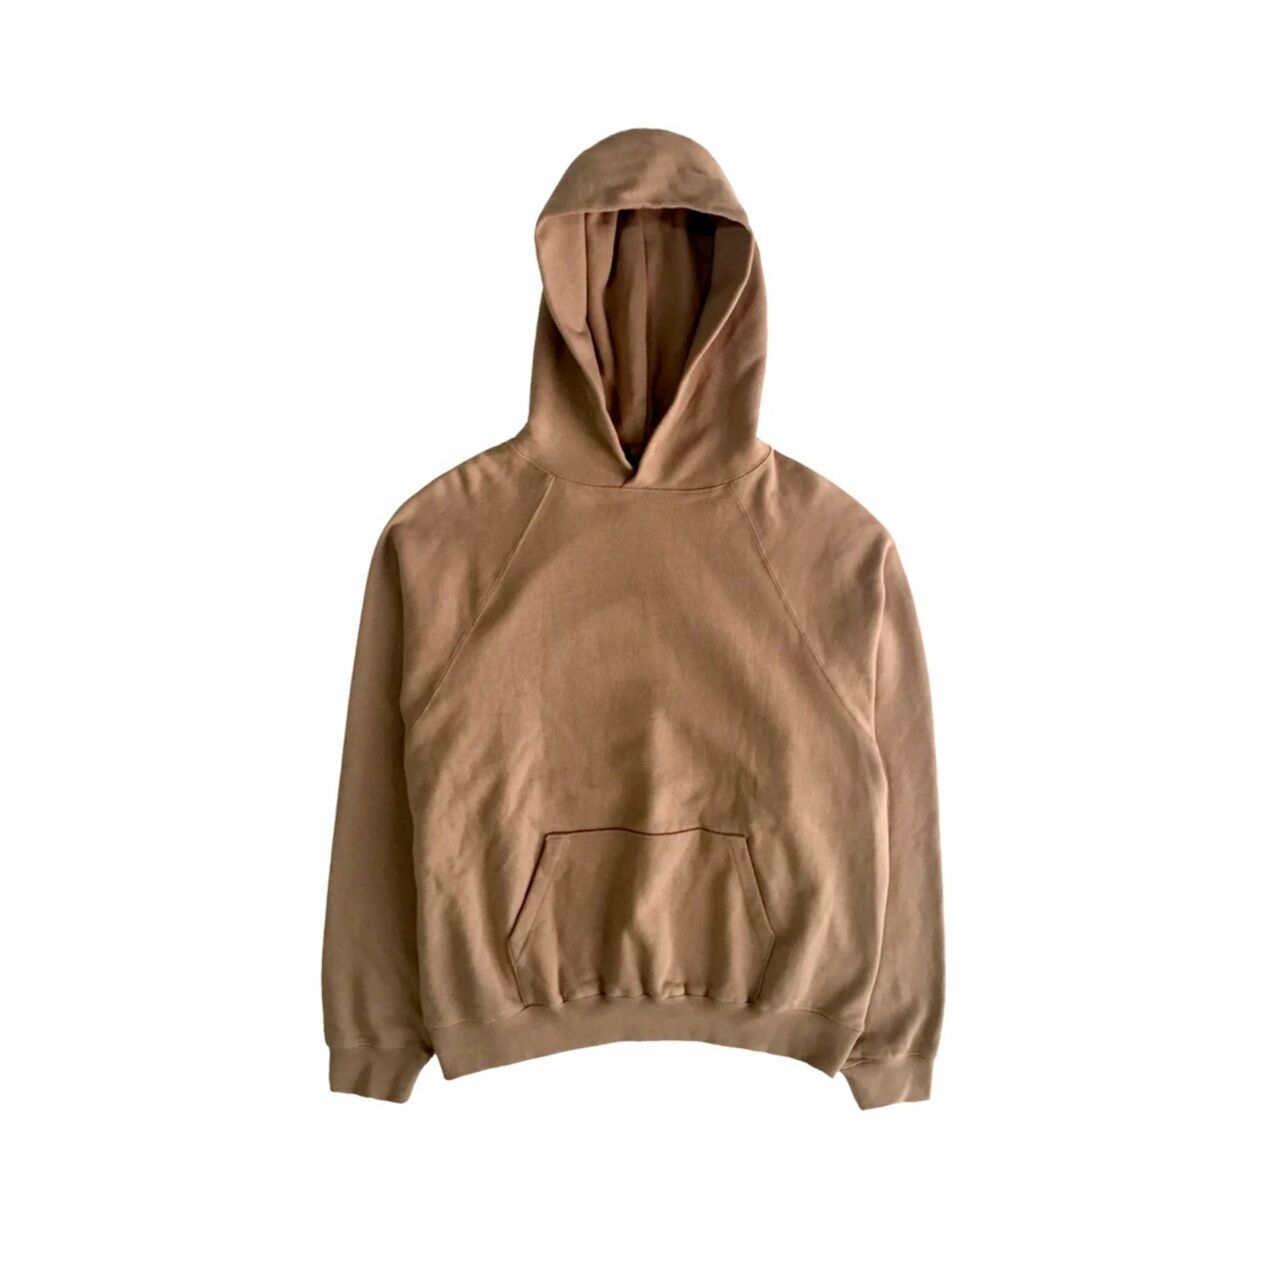 Fear Of God x Pacsun Essentials Pullover Hoodie Stucco Sweater